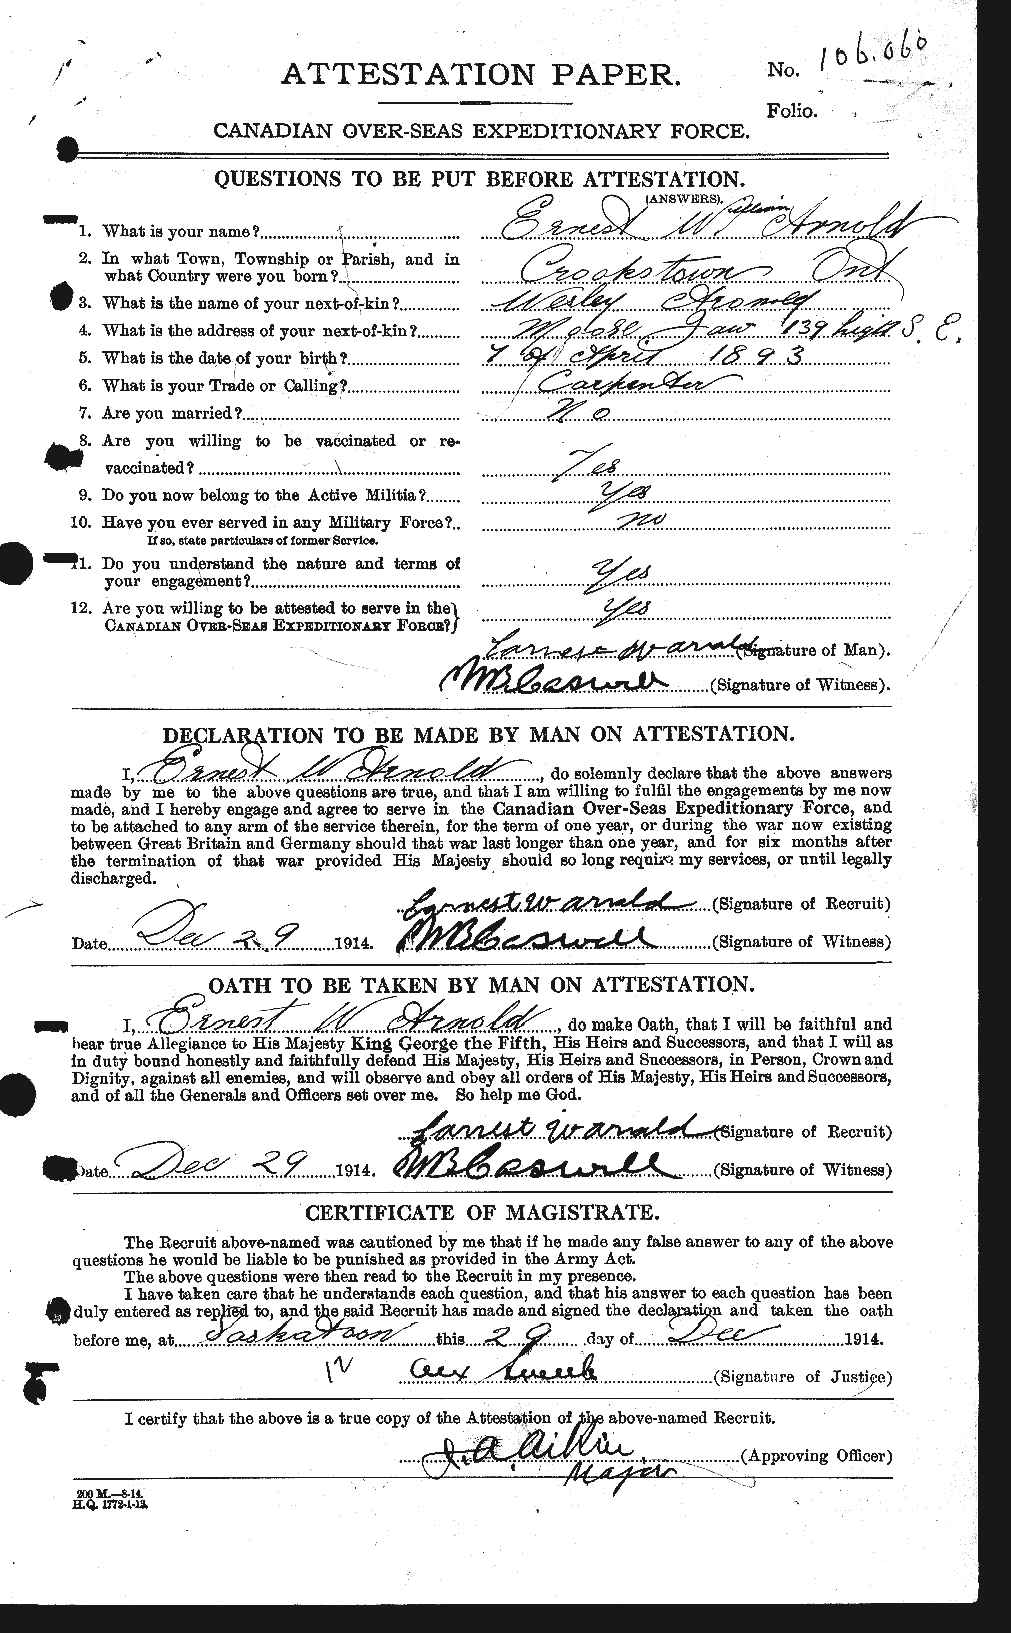 Personnel Records of the First World War - CEF 213115a